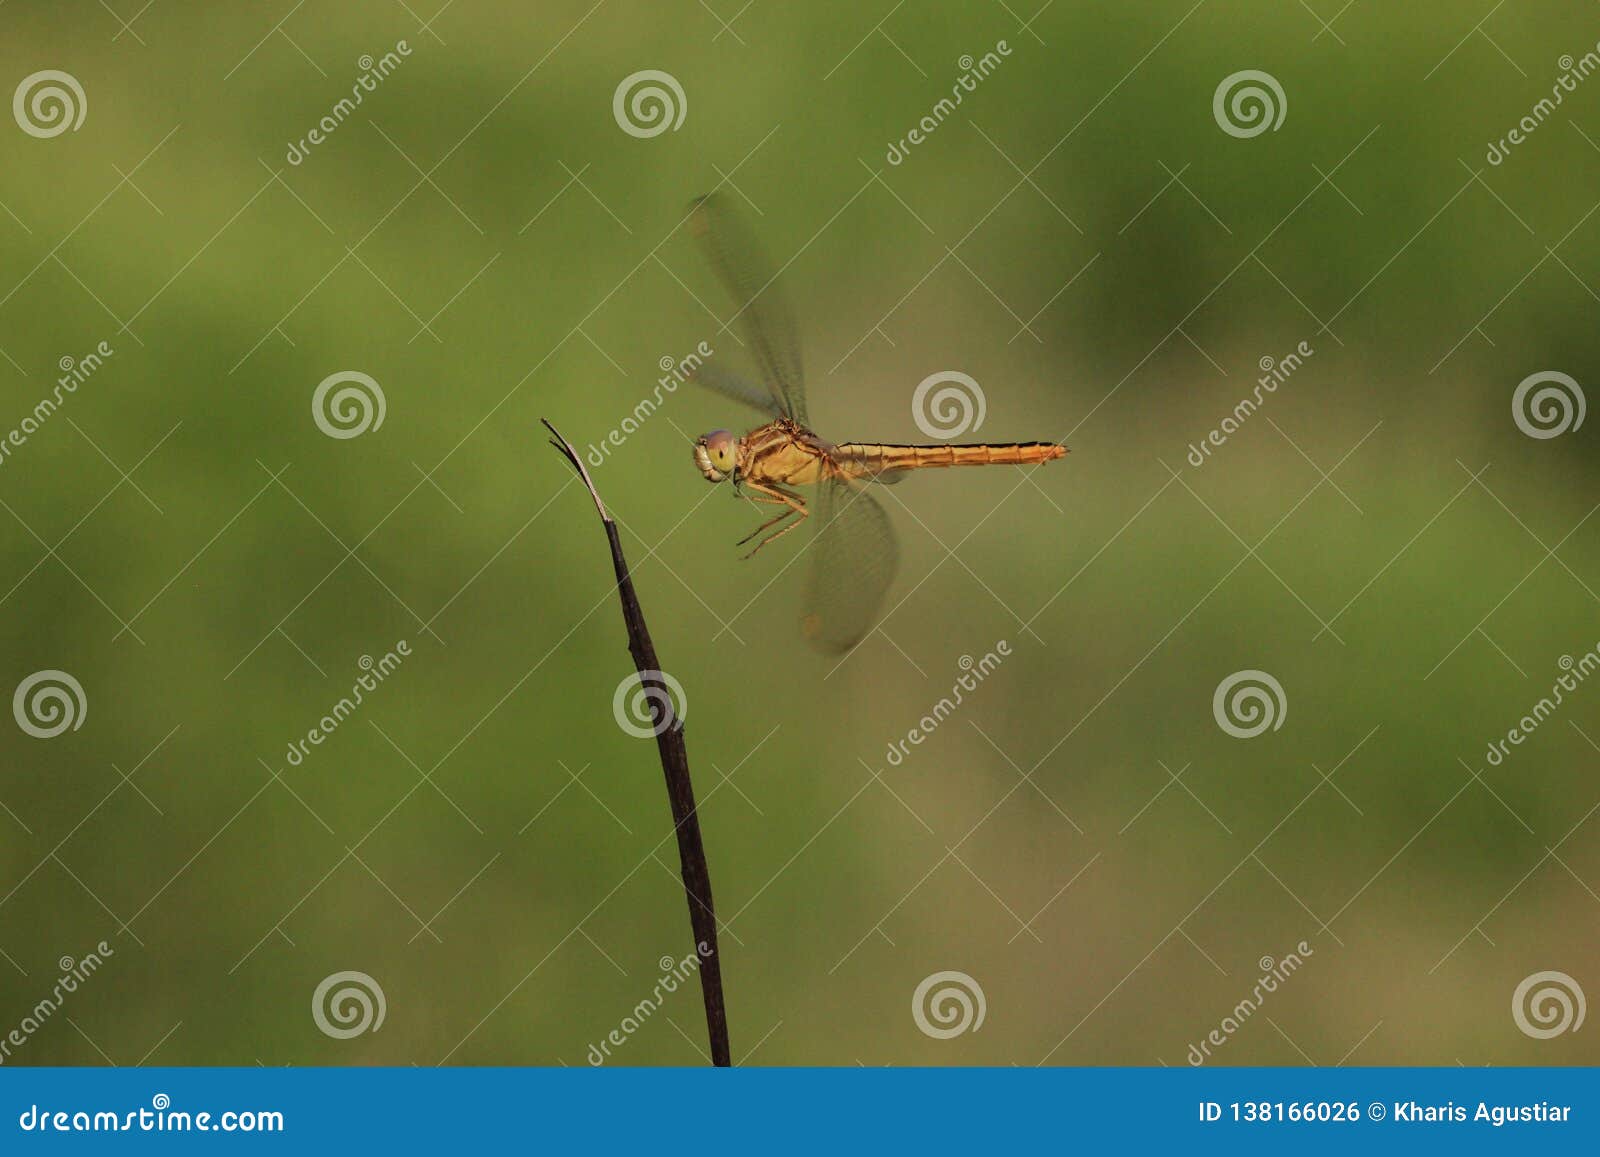 dragonfly flying moment